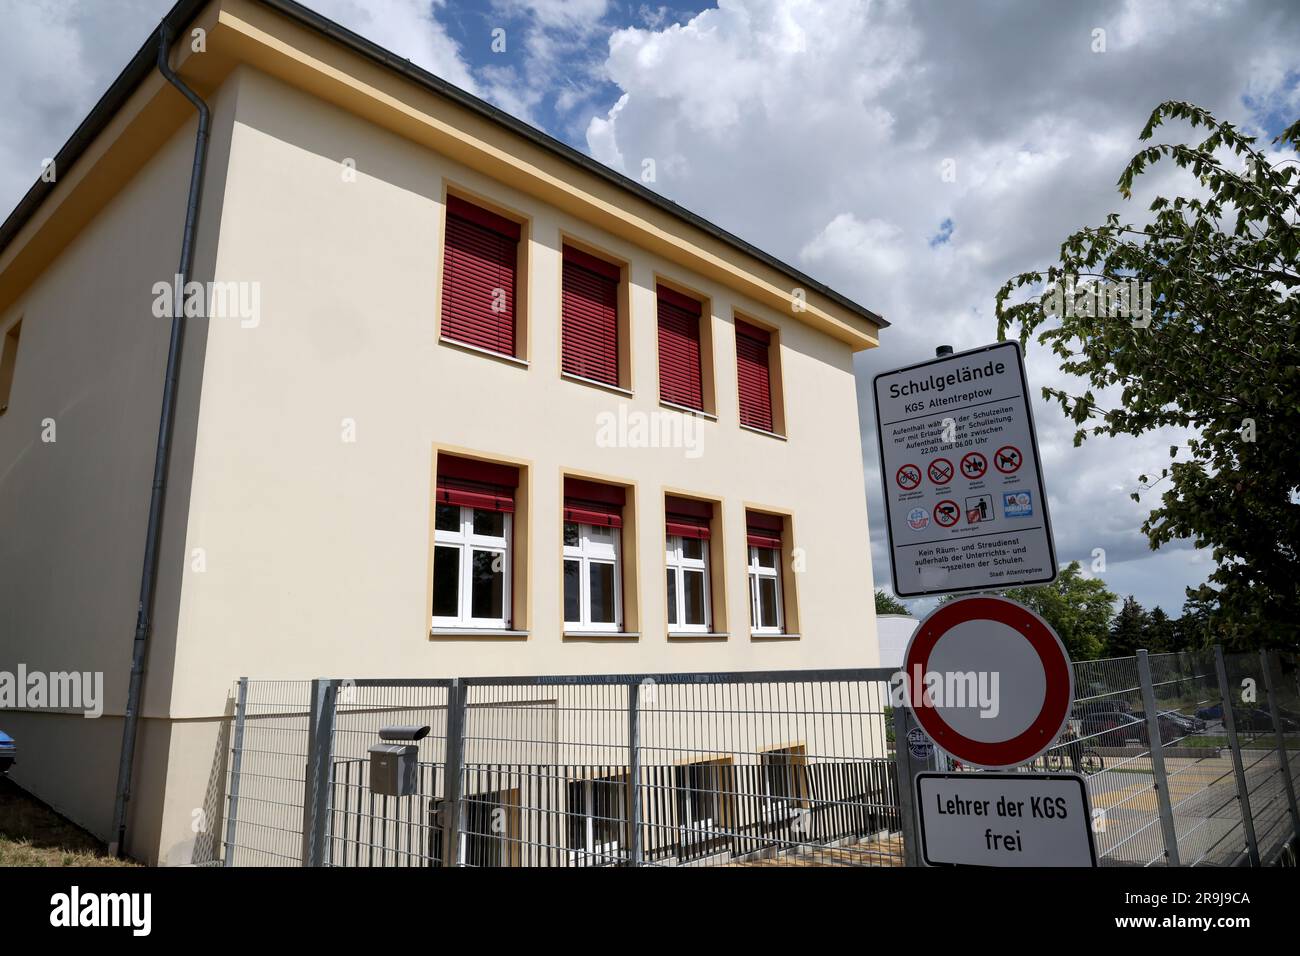 27 June 2023, Mecklenburg-Western Pomerania, Altentreptow: View of the school of the 13-year-old who died after suspected drug abuse. Four suspects have been arrested after the girl's death allegedly caused by taking an ecstasy pill. They are aged 16, 17, 17 and 37, according to police. Photo: Bernd Wüstneck/dpa Stock Photo